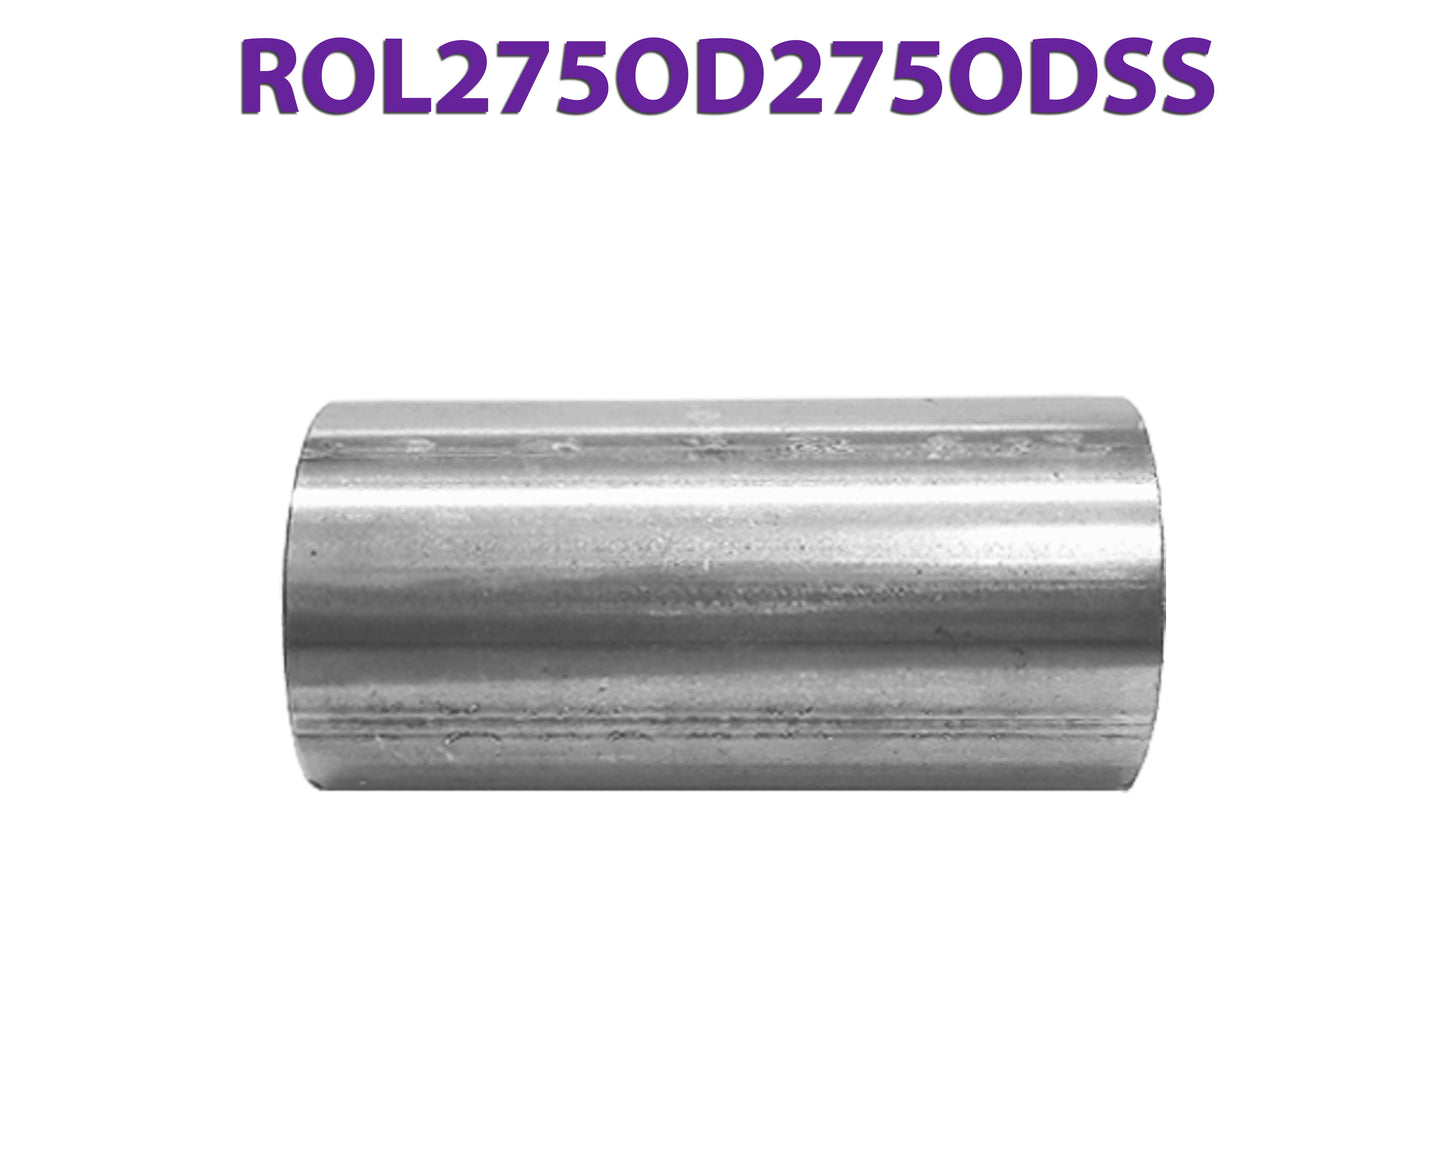 ROL275OD275ODSS 648216 2 3/4” OD to 2 3/4” OD Stainless Exhaust Component to Component Insert Coupling